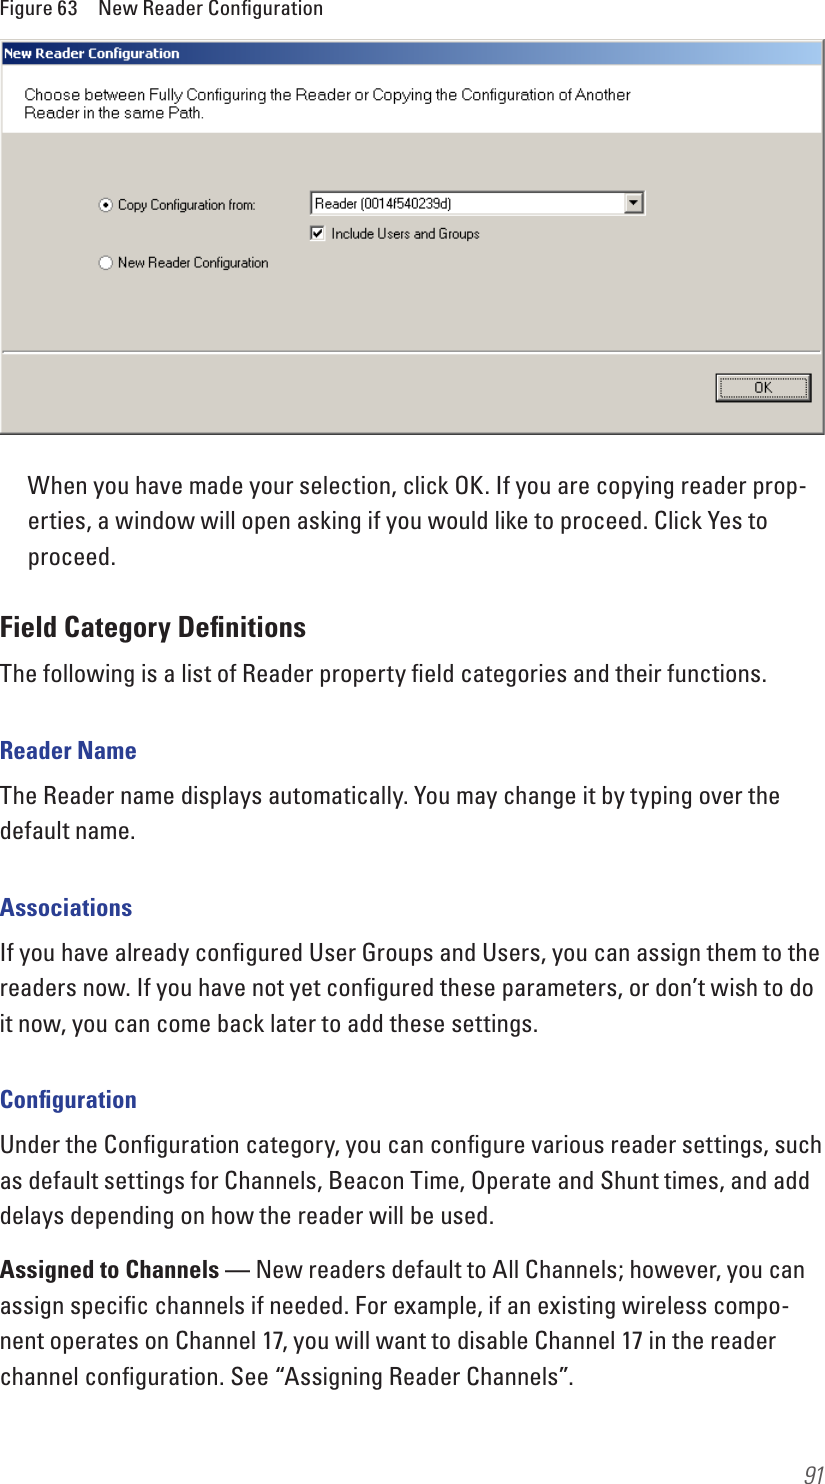 91Figure 63  New Reader ConﬁgurationWhen you have made your selection, click OK. If you are copying reader prop-erties, a window will open asking if you would like to proceed. Click Yes to proceed.Field Category DeﬁnitionsThe following is a list of Reader property ﬁeld categories and their functions.Reader NameThe Reader name displays automatically. You may change it by typing over the default name.AssociationsIf you have already conﬁgured User Groups and Users, you can assign them to the readers now. If you have not yet conﬁgured these parameters, or don’t wish to do it now, you can come back later to add these settings. ConﬁgurationUnder the Conﬁguration category, you can conﬁgure various reader settings, such as default settings for Channels, Beacon Time, Operate and Shunt times, and add delays depending on how the reader will be used.Assigned to Channels — New readers default to All Channels; however, you can assign speciﬁc channels if needed. For example, if an existing wireless compo-nent operates on Channel 17, you will want to disable Channel 17 in the reader channel conﬁguration. See “Assigning Reader Channels”.